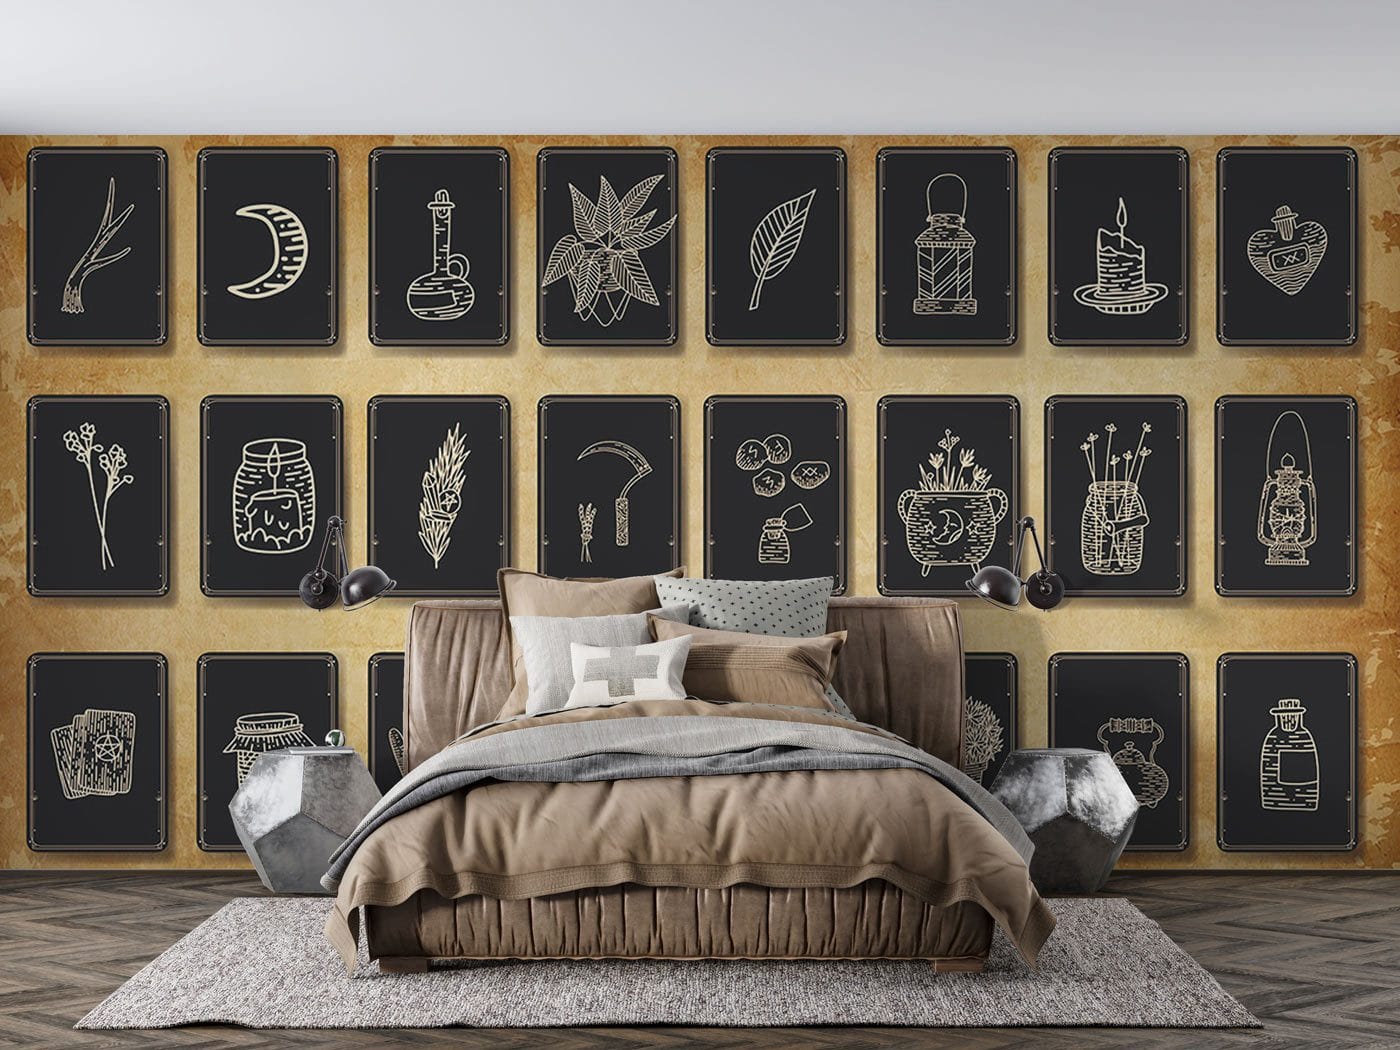 Wallpaper mural with an icon pattern for use as a bedroom decoration